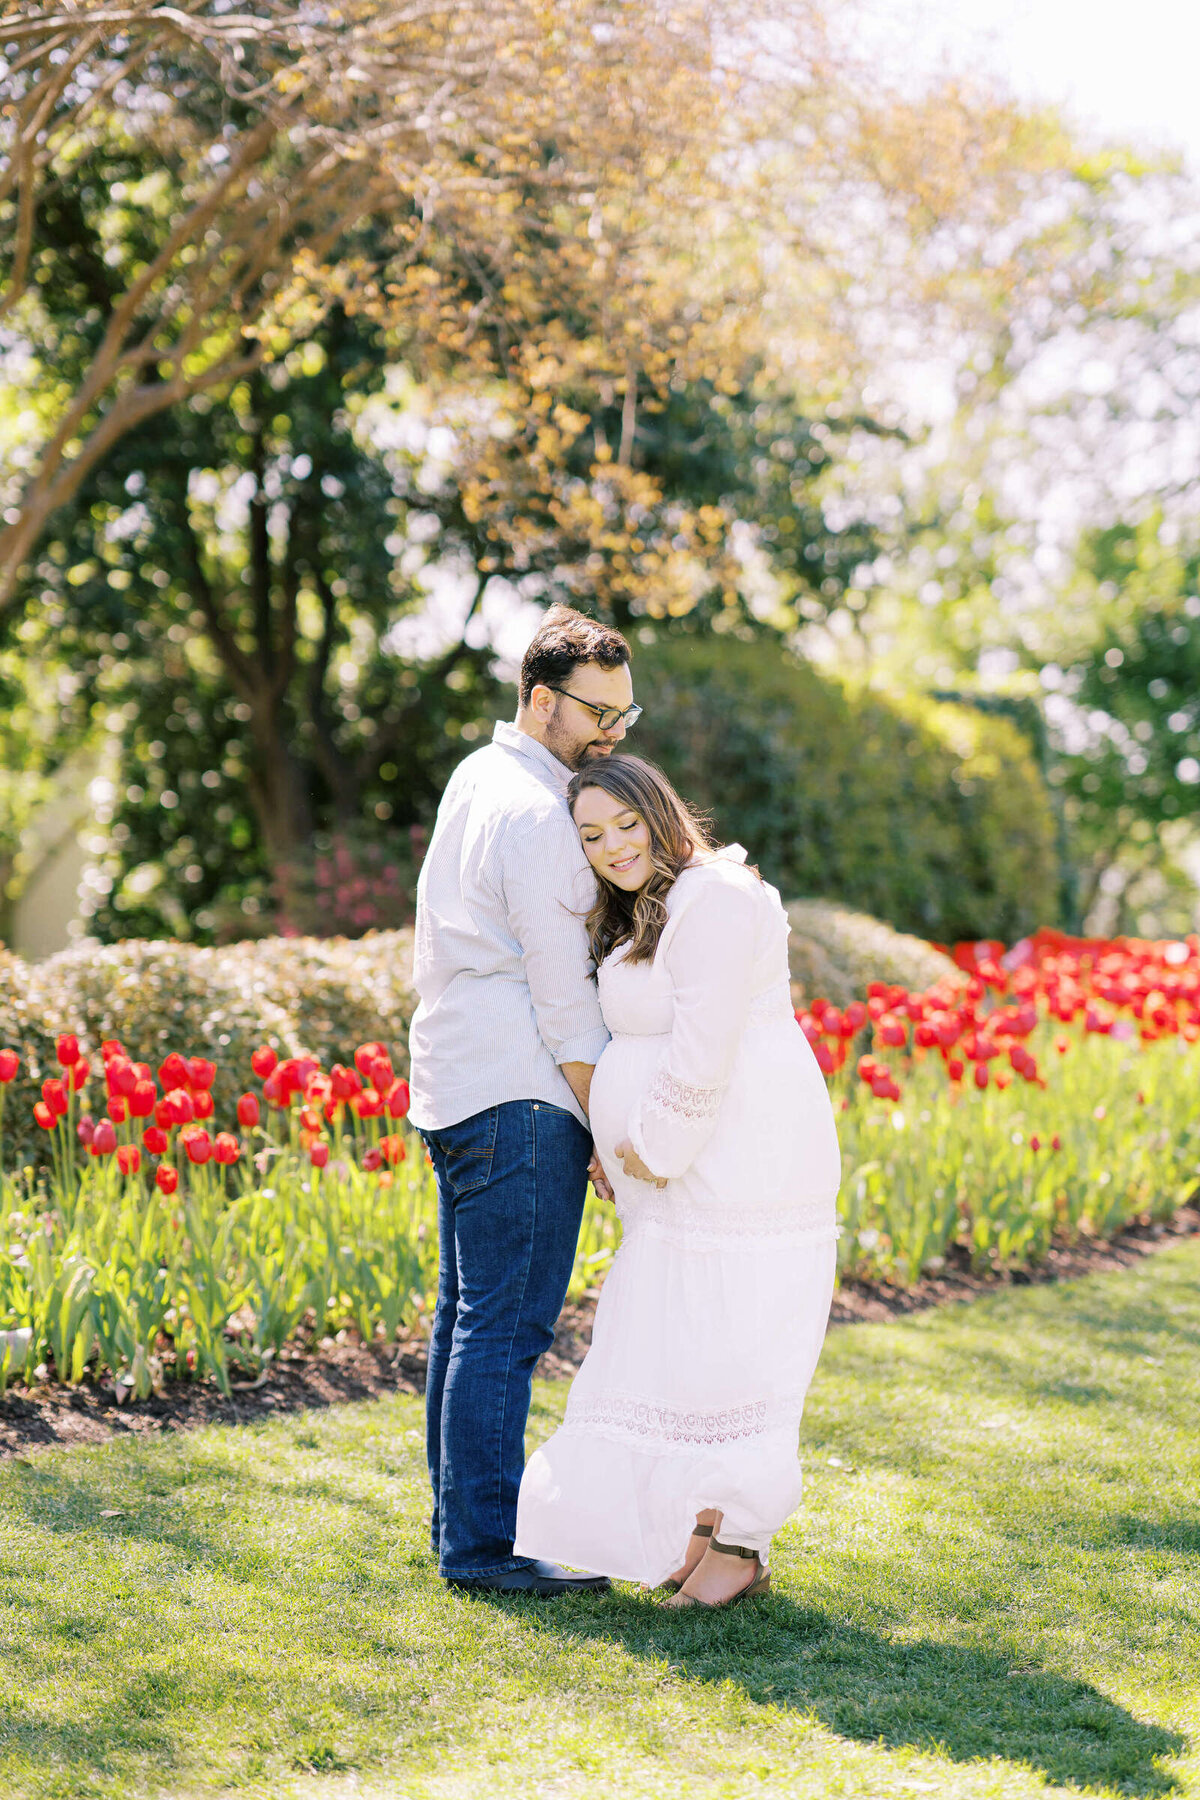 16 Dallas Arboretum Maternity Family Session Kate Panza Photography Kim and Nic